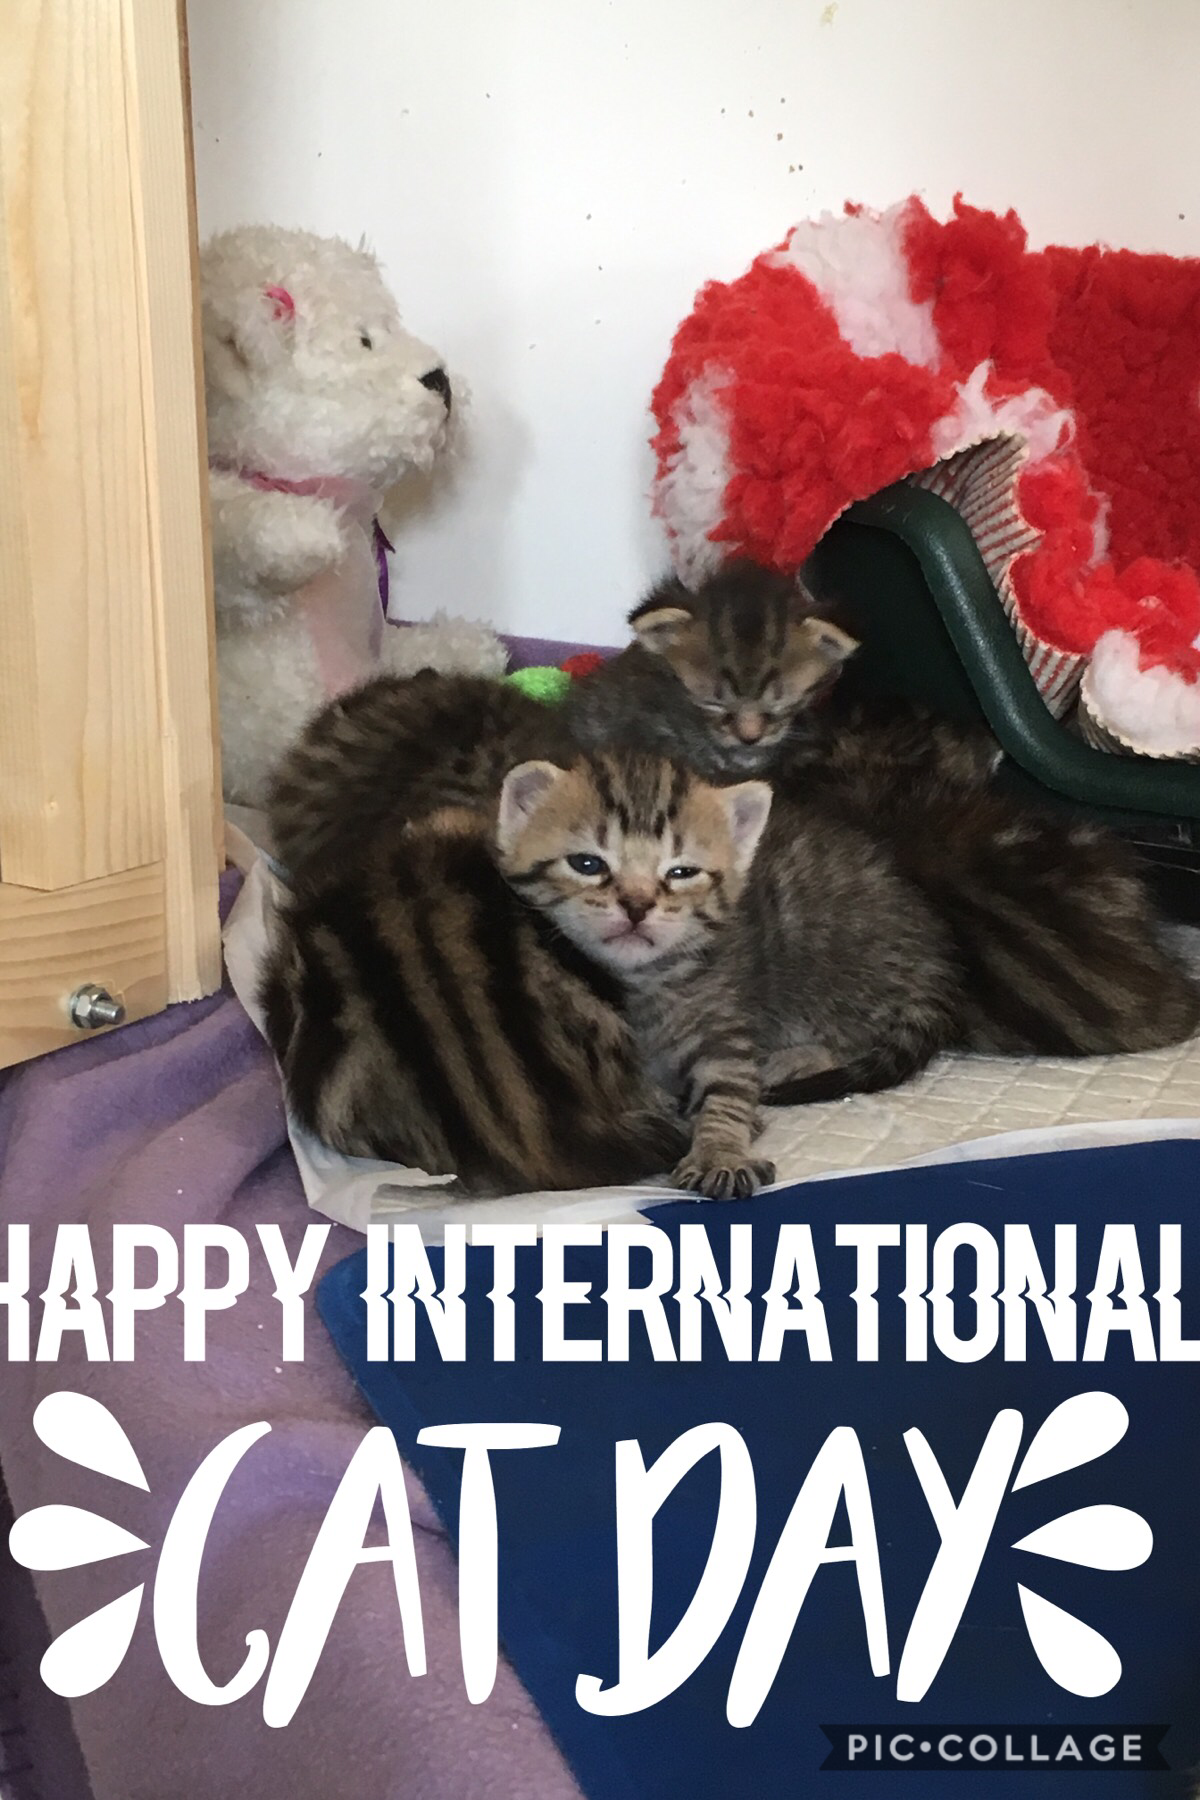 Tap 
Happy international cat day! 
Sorry it’s a bit late but we have to celebrate it lol

So I visited these kittens today AND WE’RE GETTING TWO!!!!! THEY’RE SOOOO CUTEEEEE